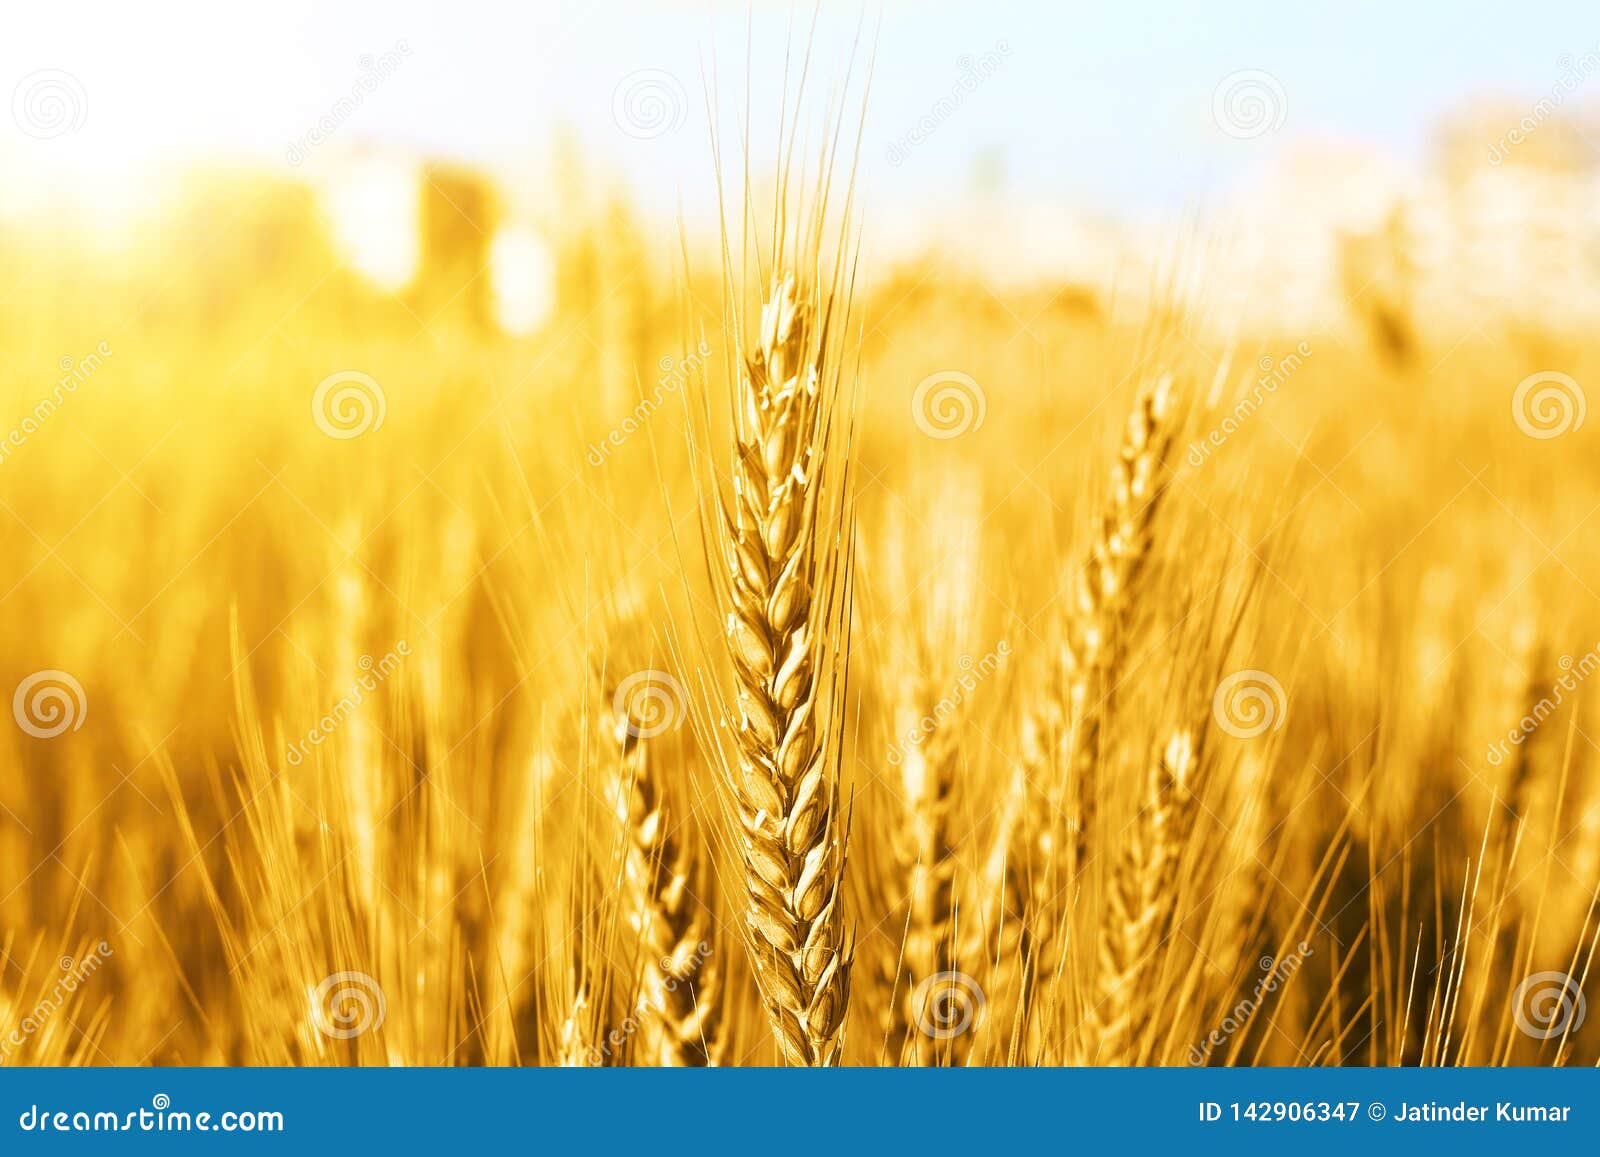 Picture of Wheat Fields for Punjabi Culture in Baisakhi Festival ...